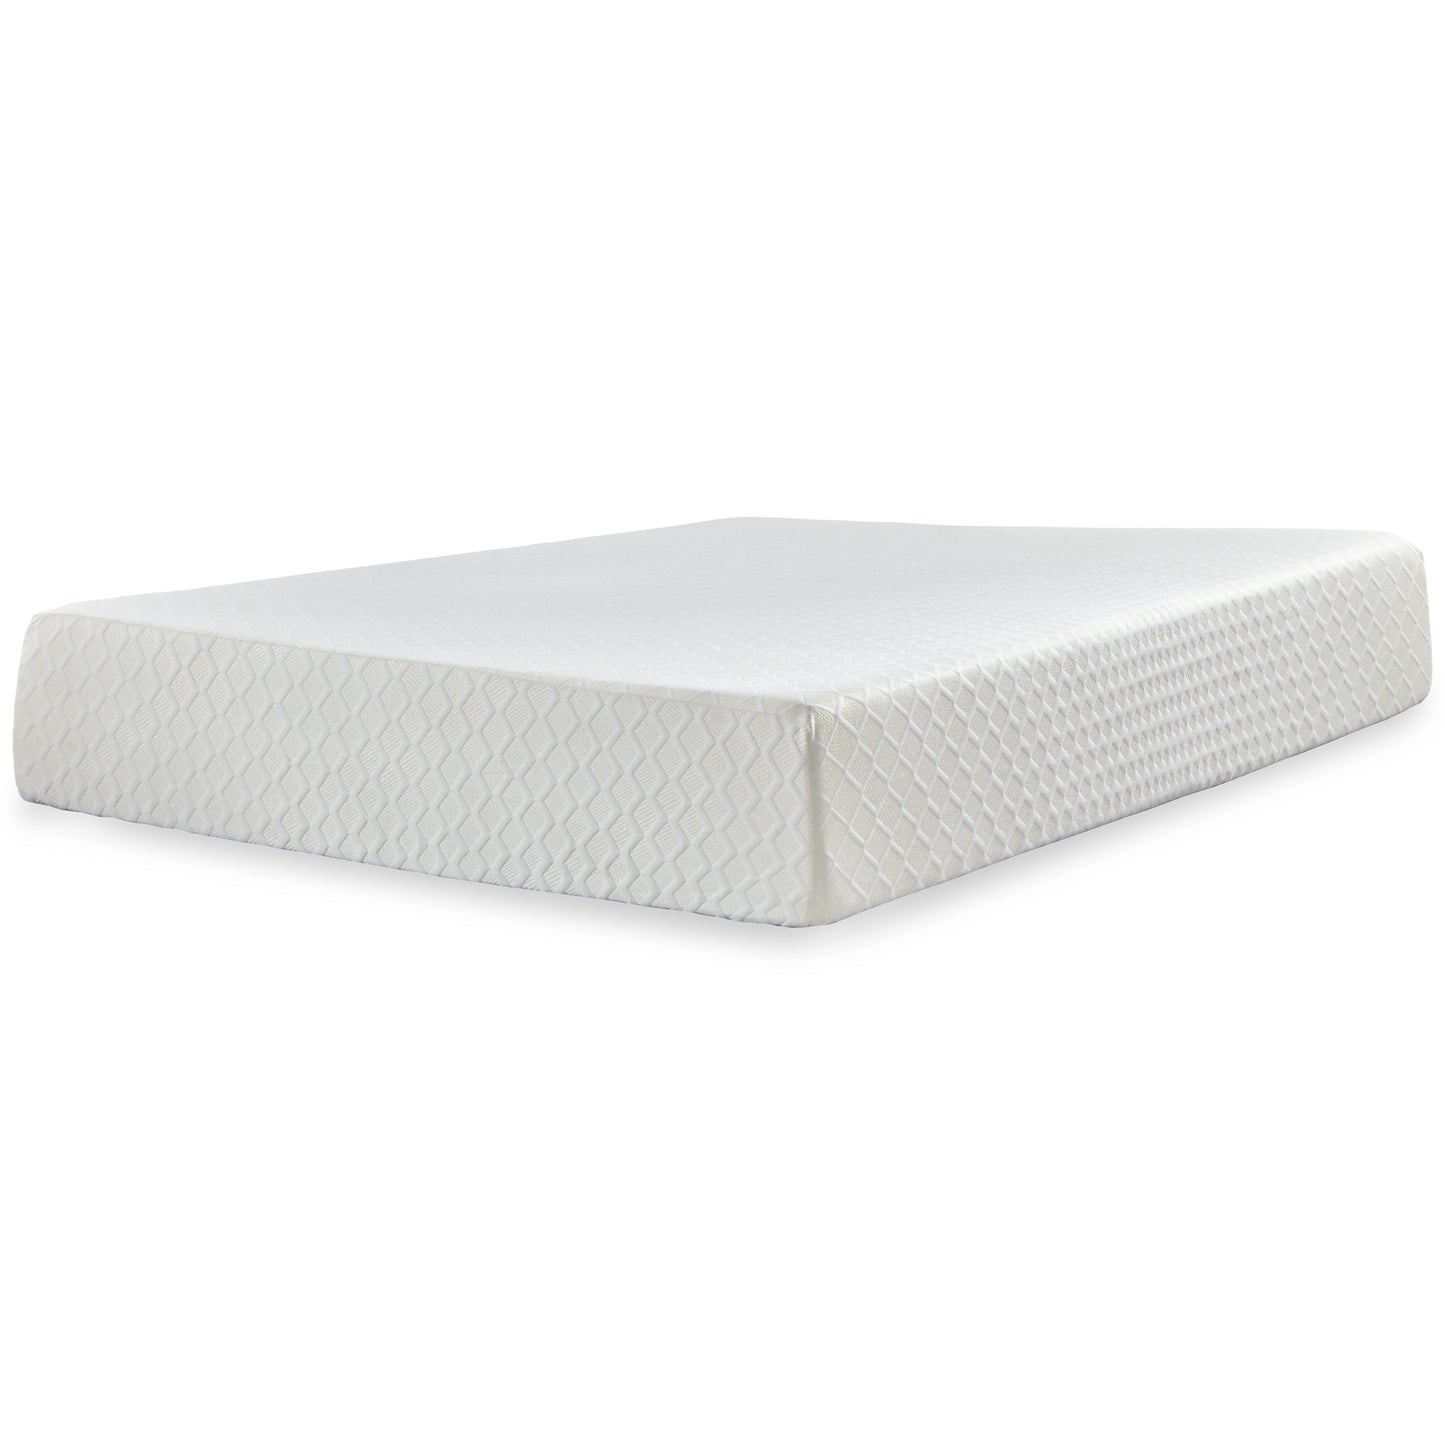 Chime 12 Inch Memory Foam Mattress with Foundation